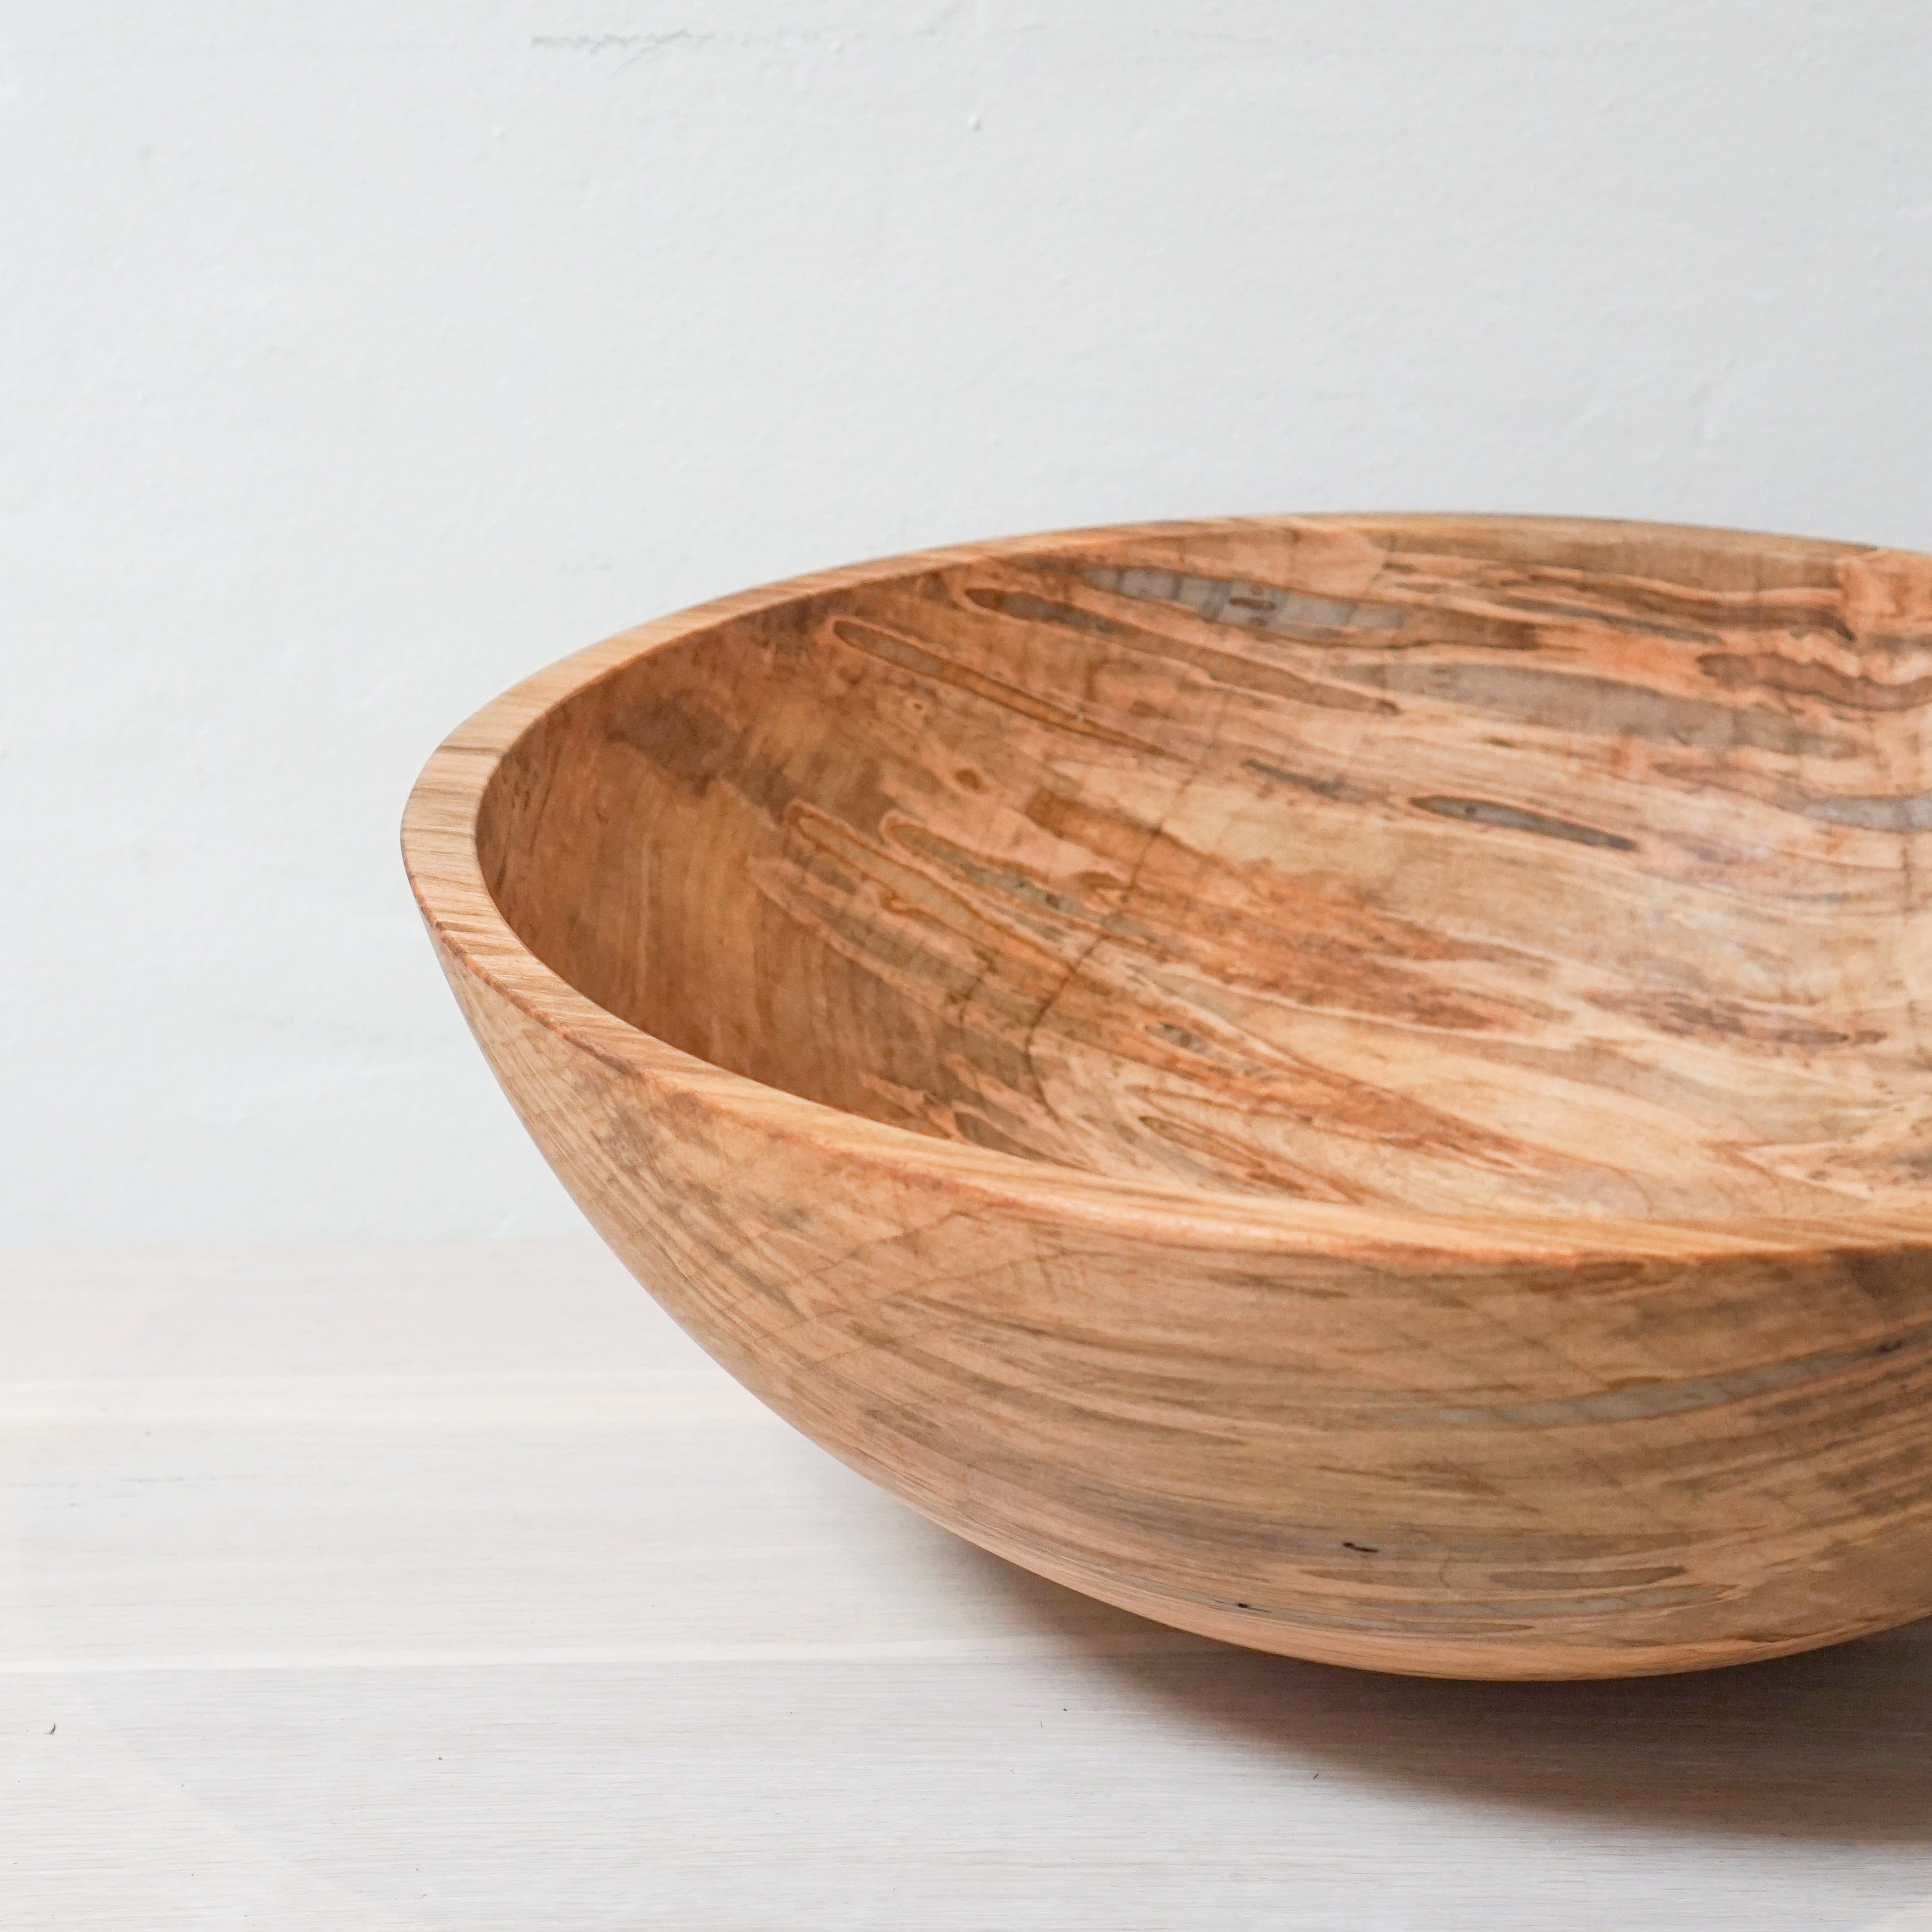 Spencer Peterman Bowls Spalted Maple / 18" Round Salad Bowl